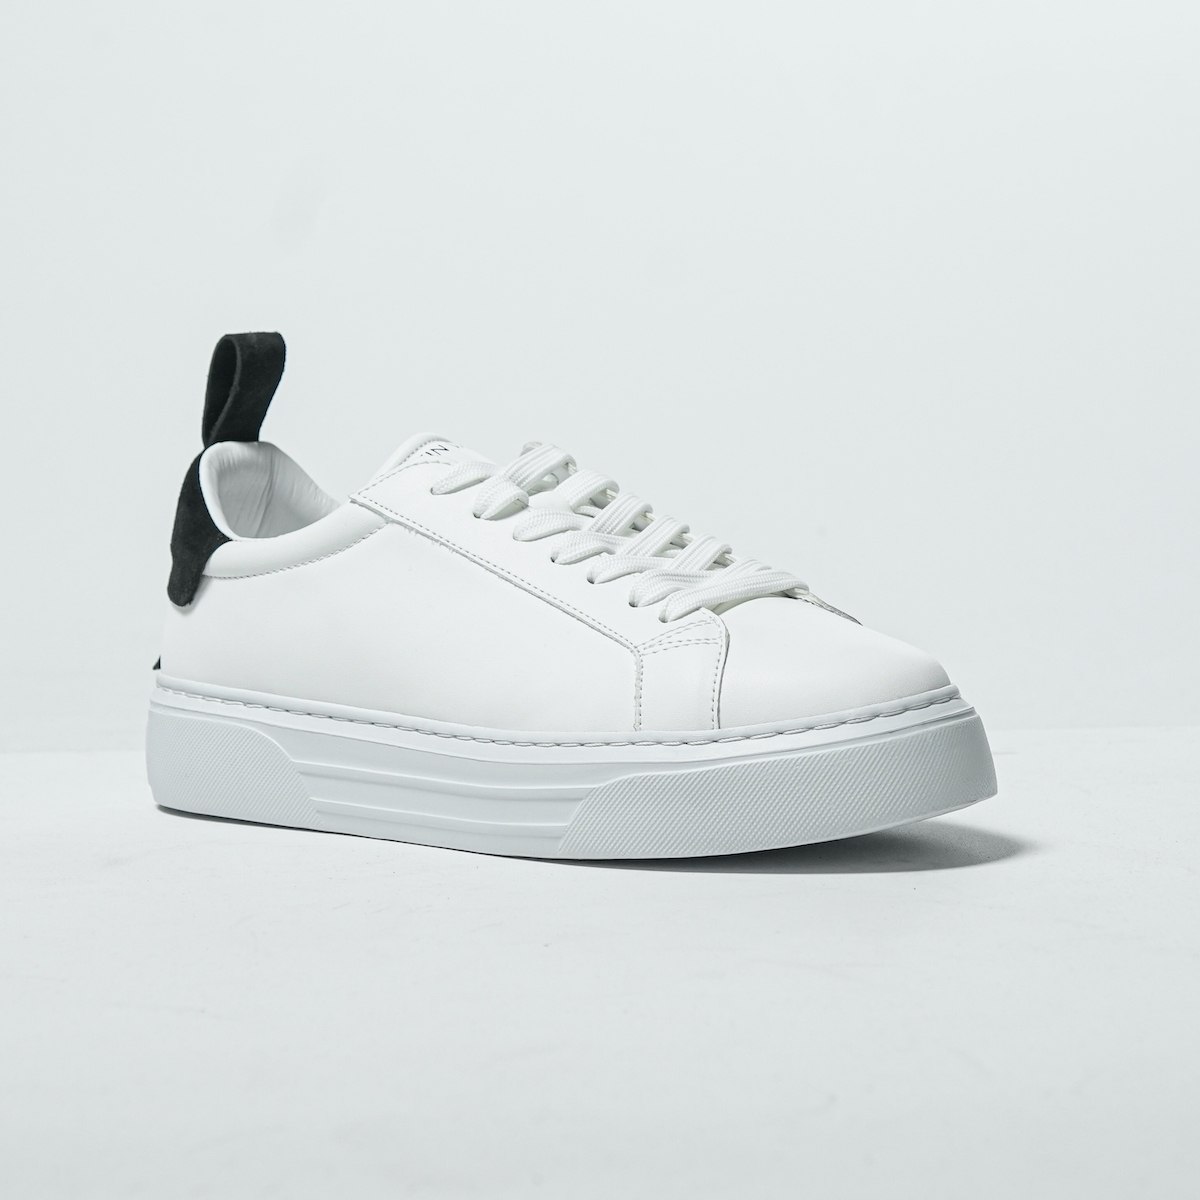 Bobe Suede Belted New Sneakers White Black | Martin Valen